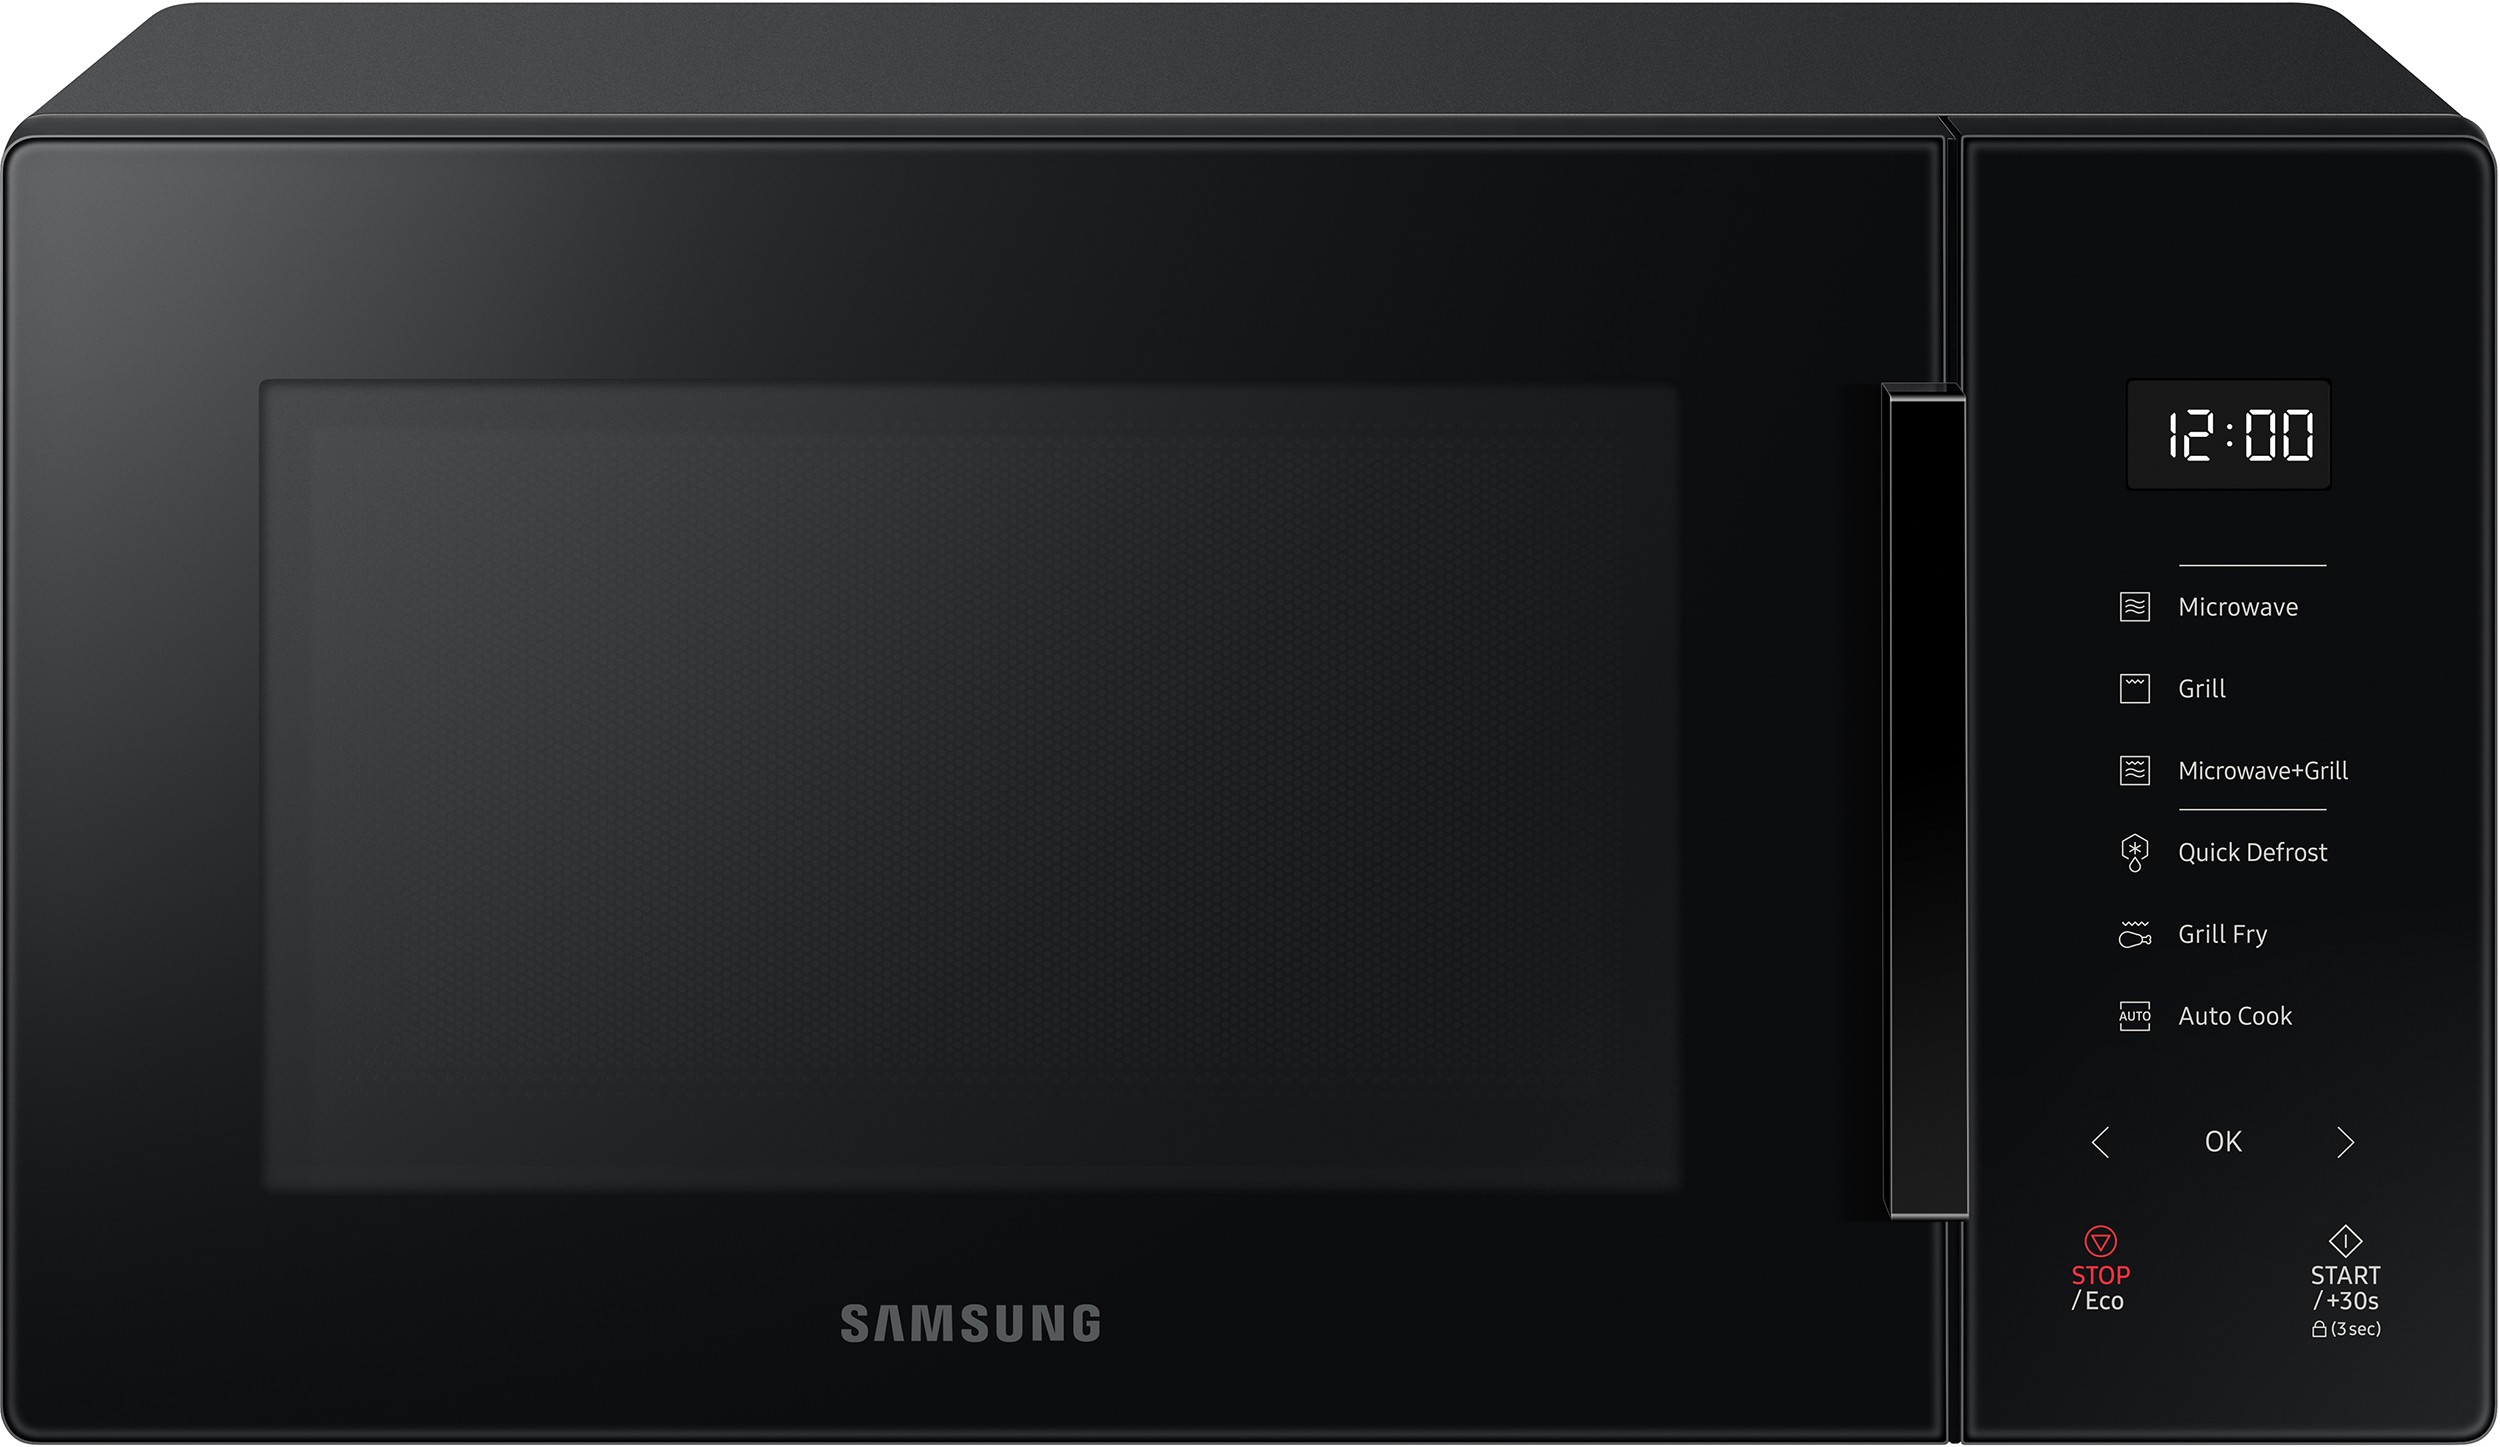 SAMSUNG Micro ondes Grill   MG23T5018CK